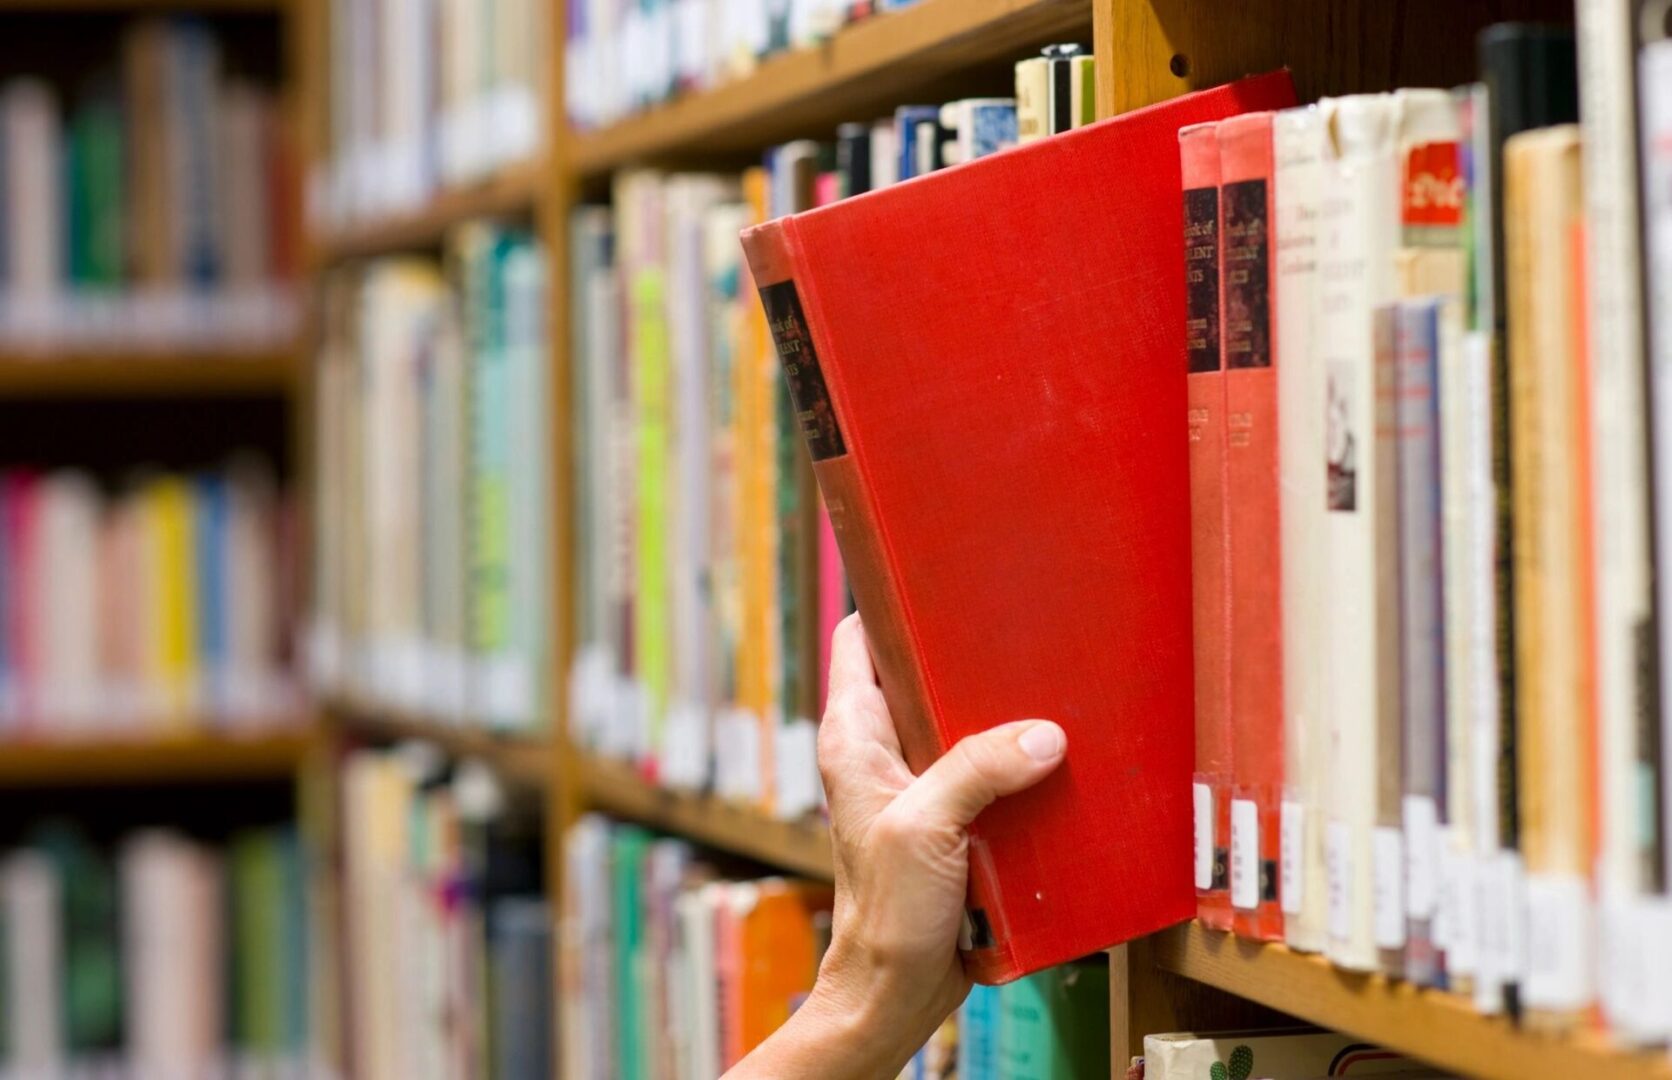 stock photo of a book being pulled from a library shelf